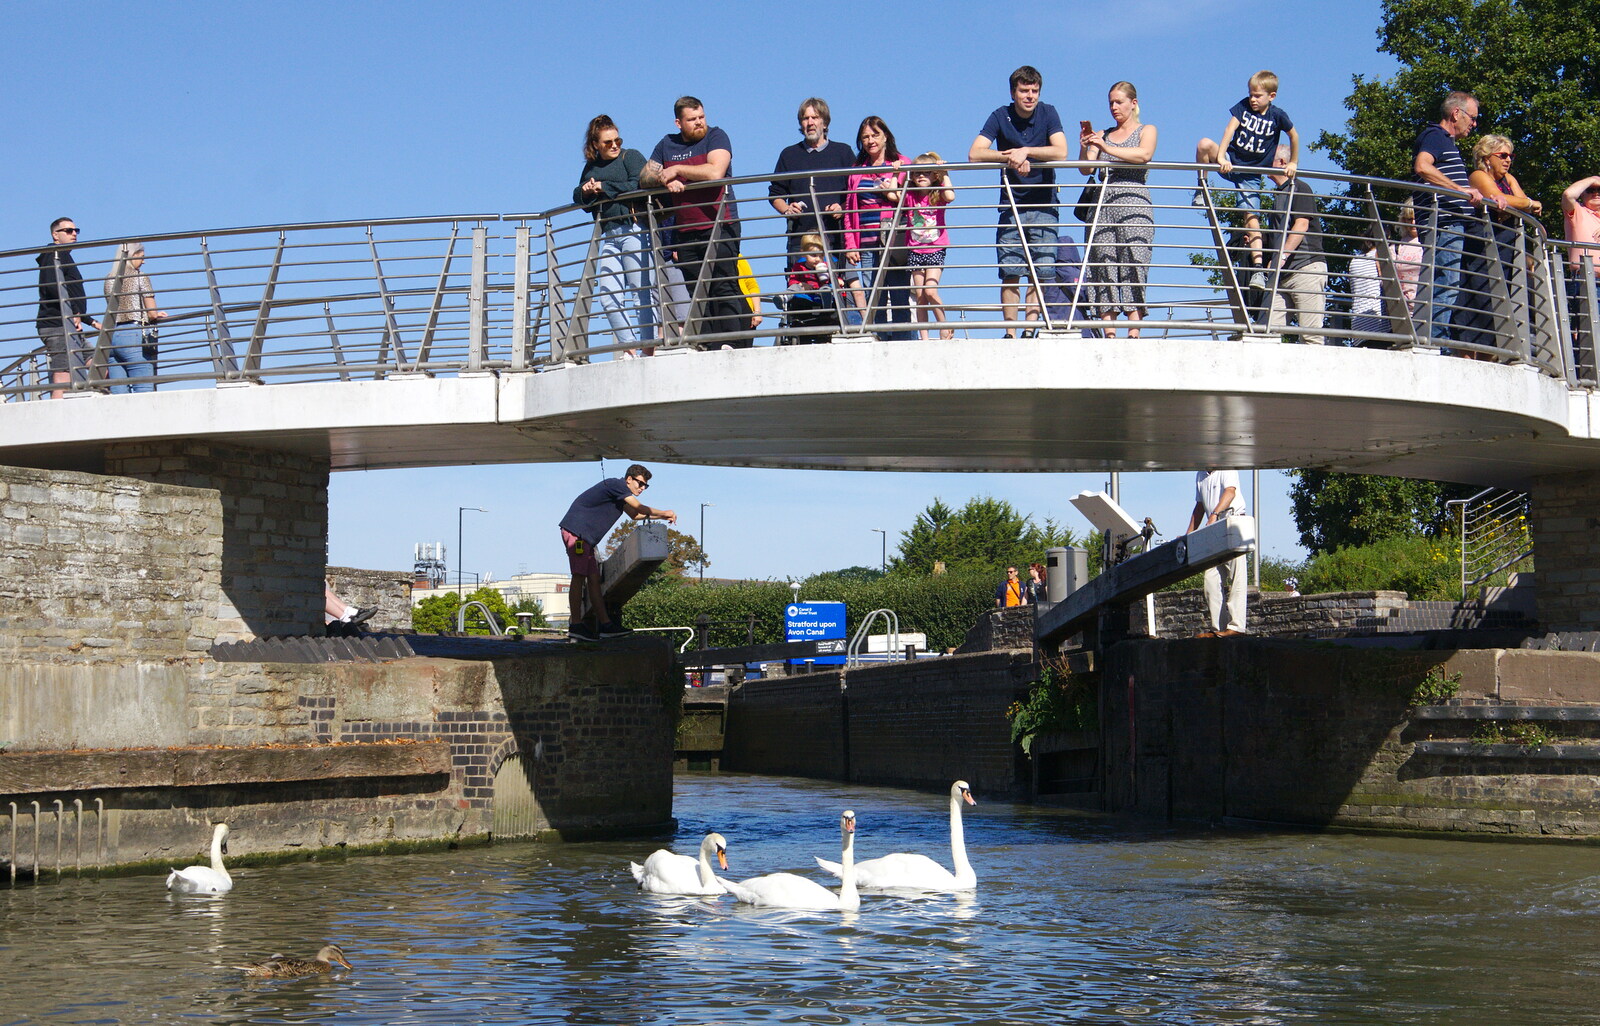 Crowds and swans watch the departing boat from A Boat Trip on the River, Stratford upon Avon, Warwickshire - 14th September 2019